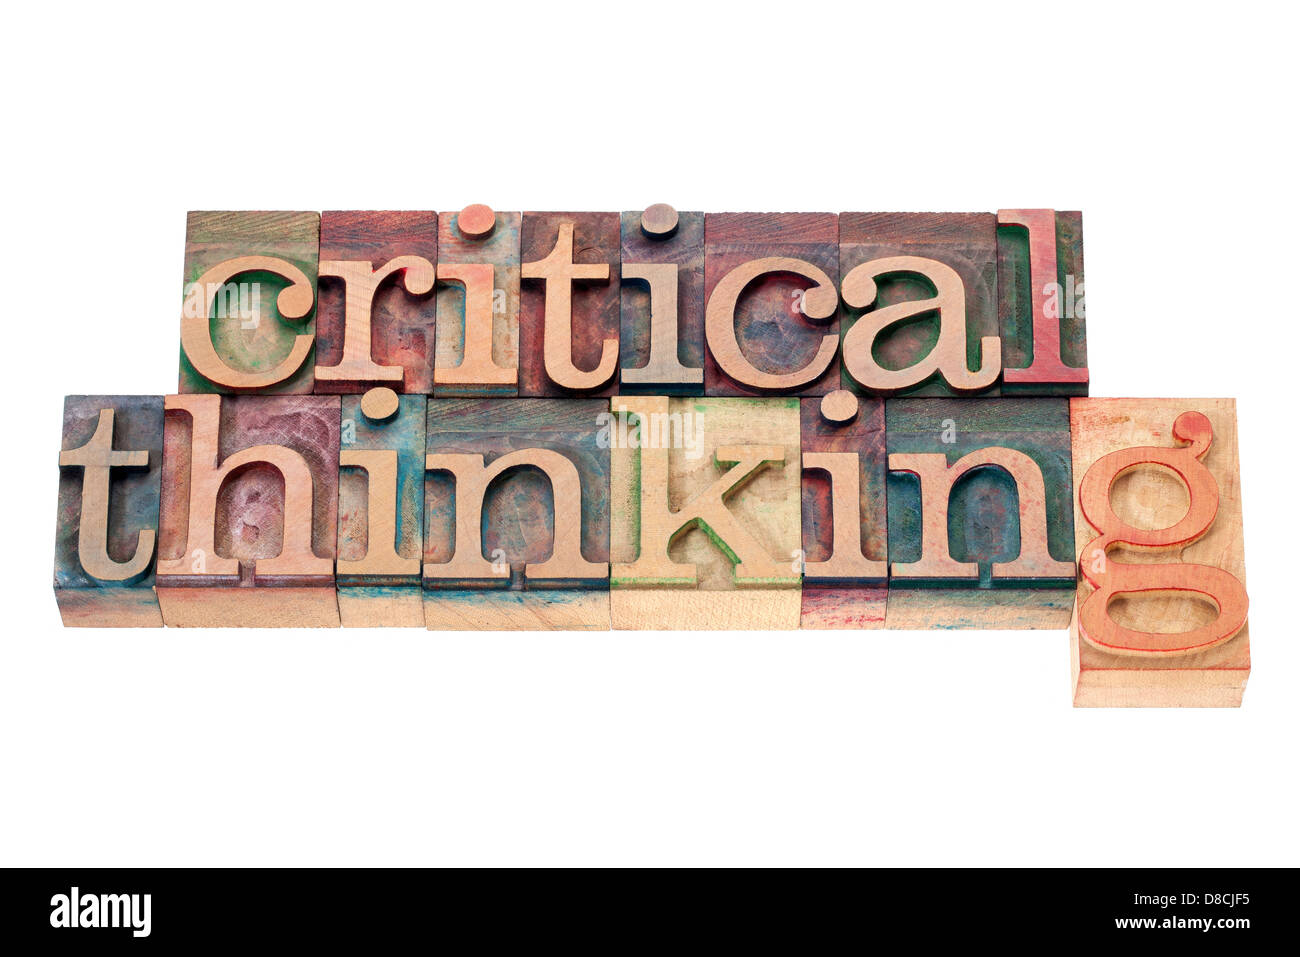 critical thinking - isolated text in letterpress wood type printing blocks Stock Photo